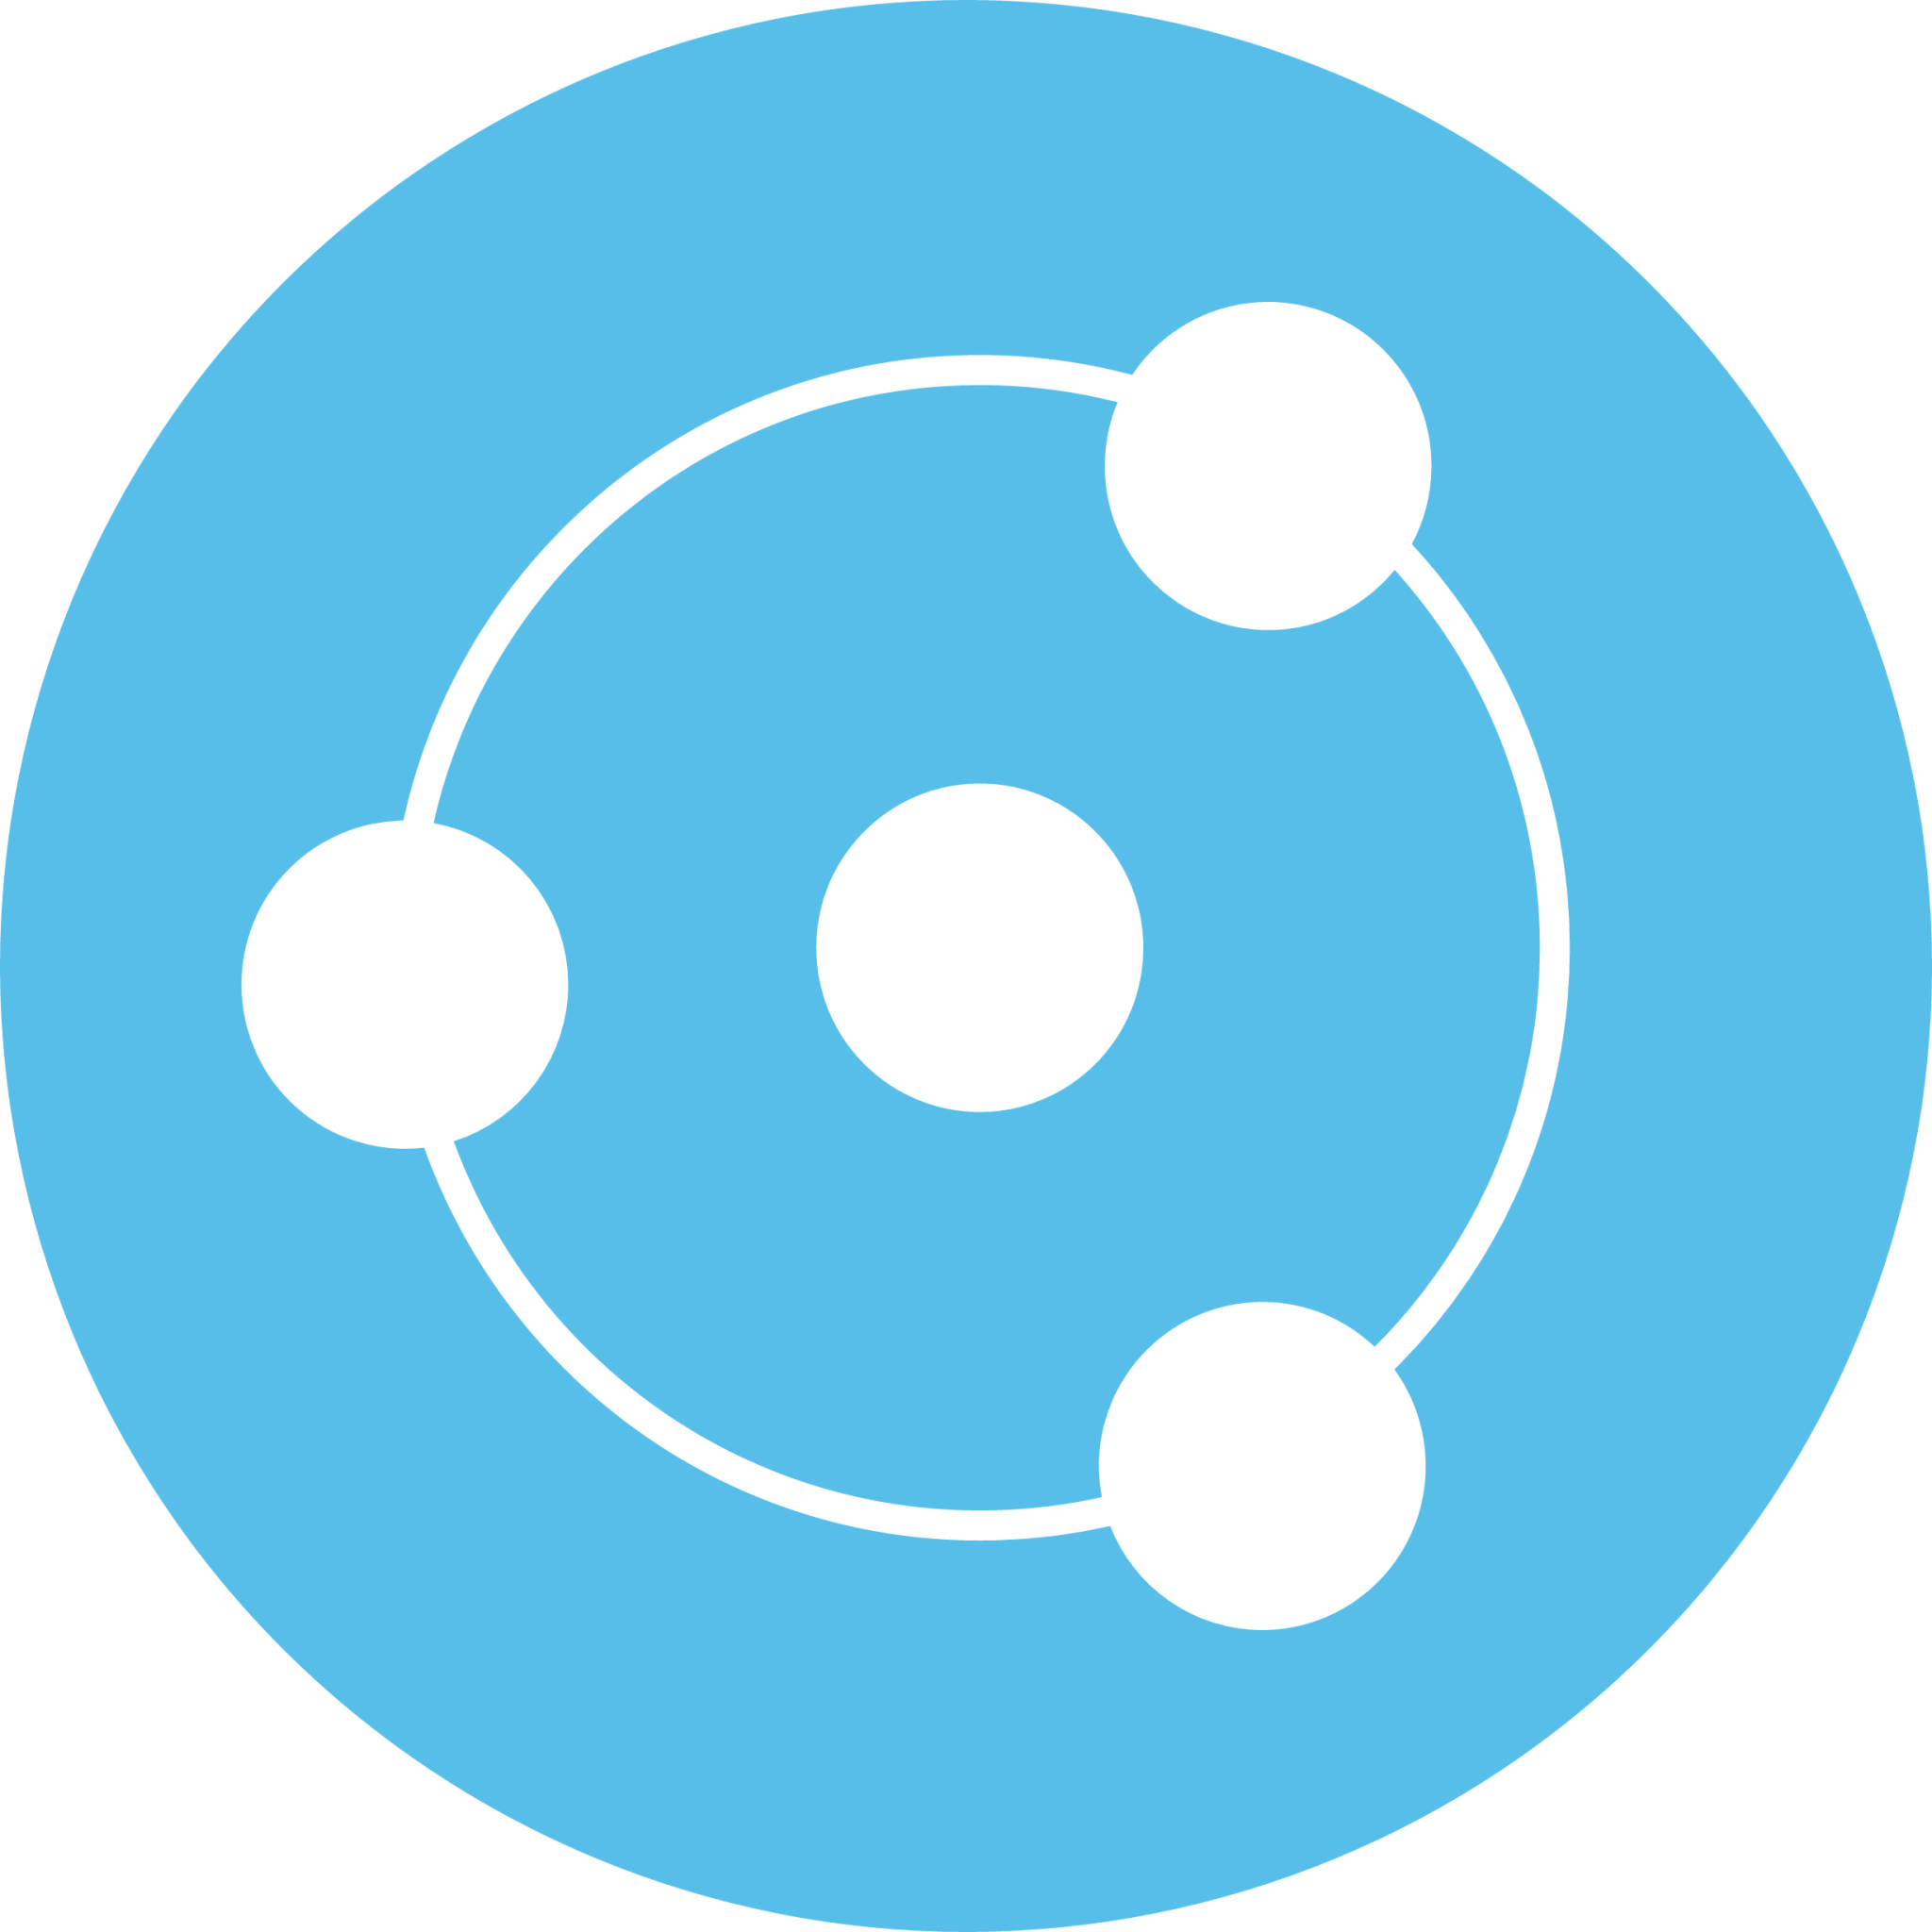 ION Cryptocurrency icon